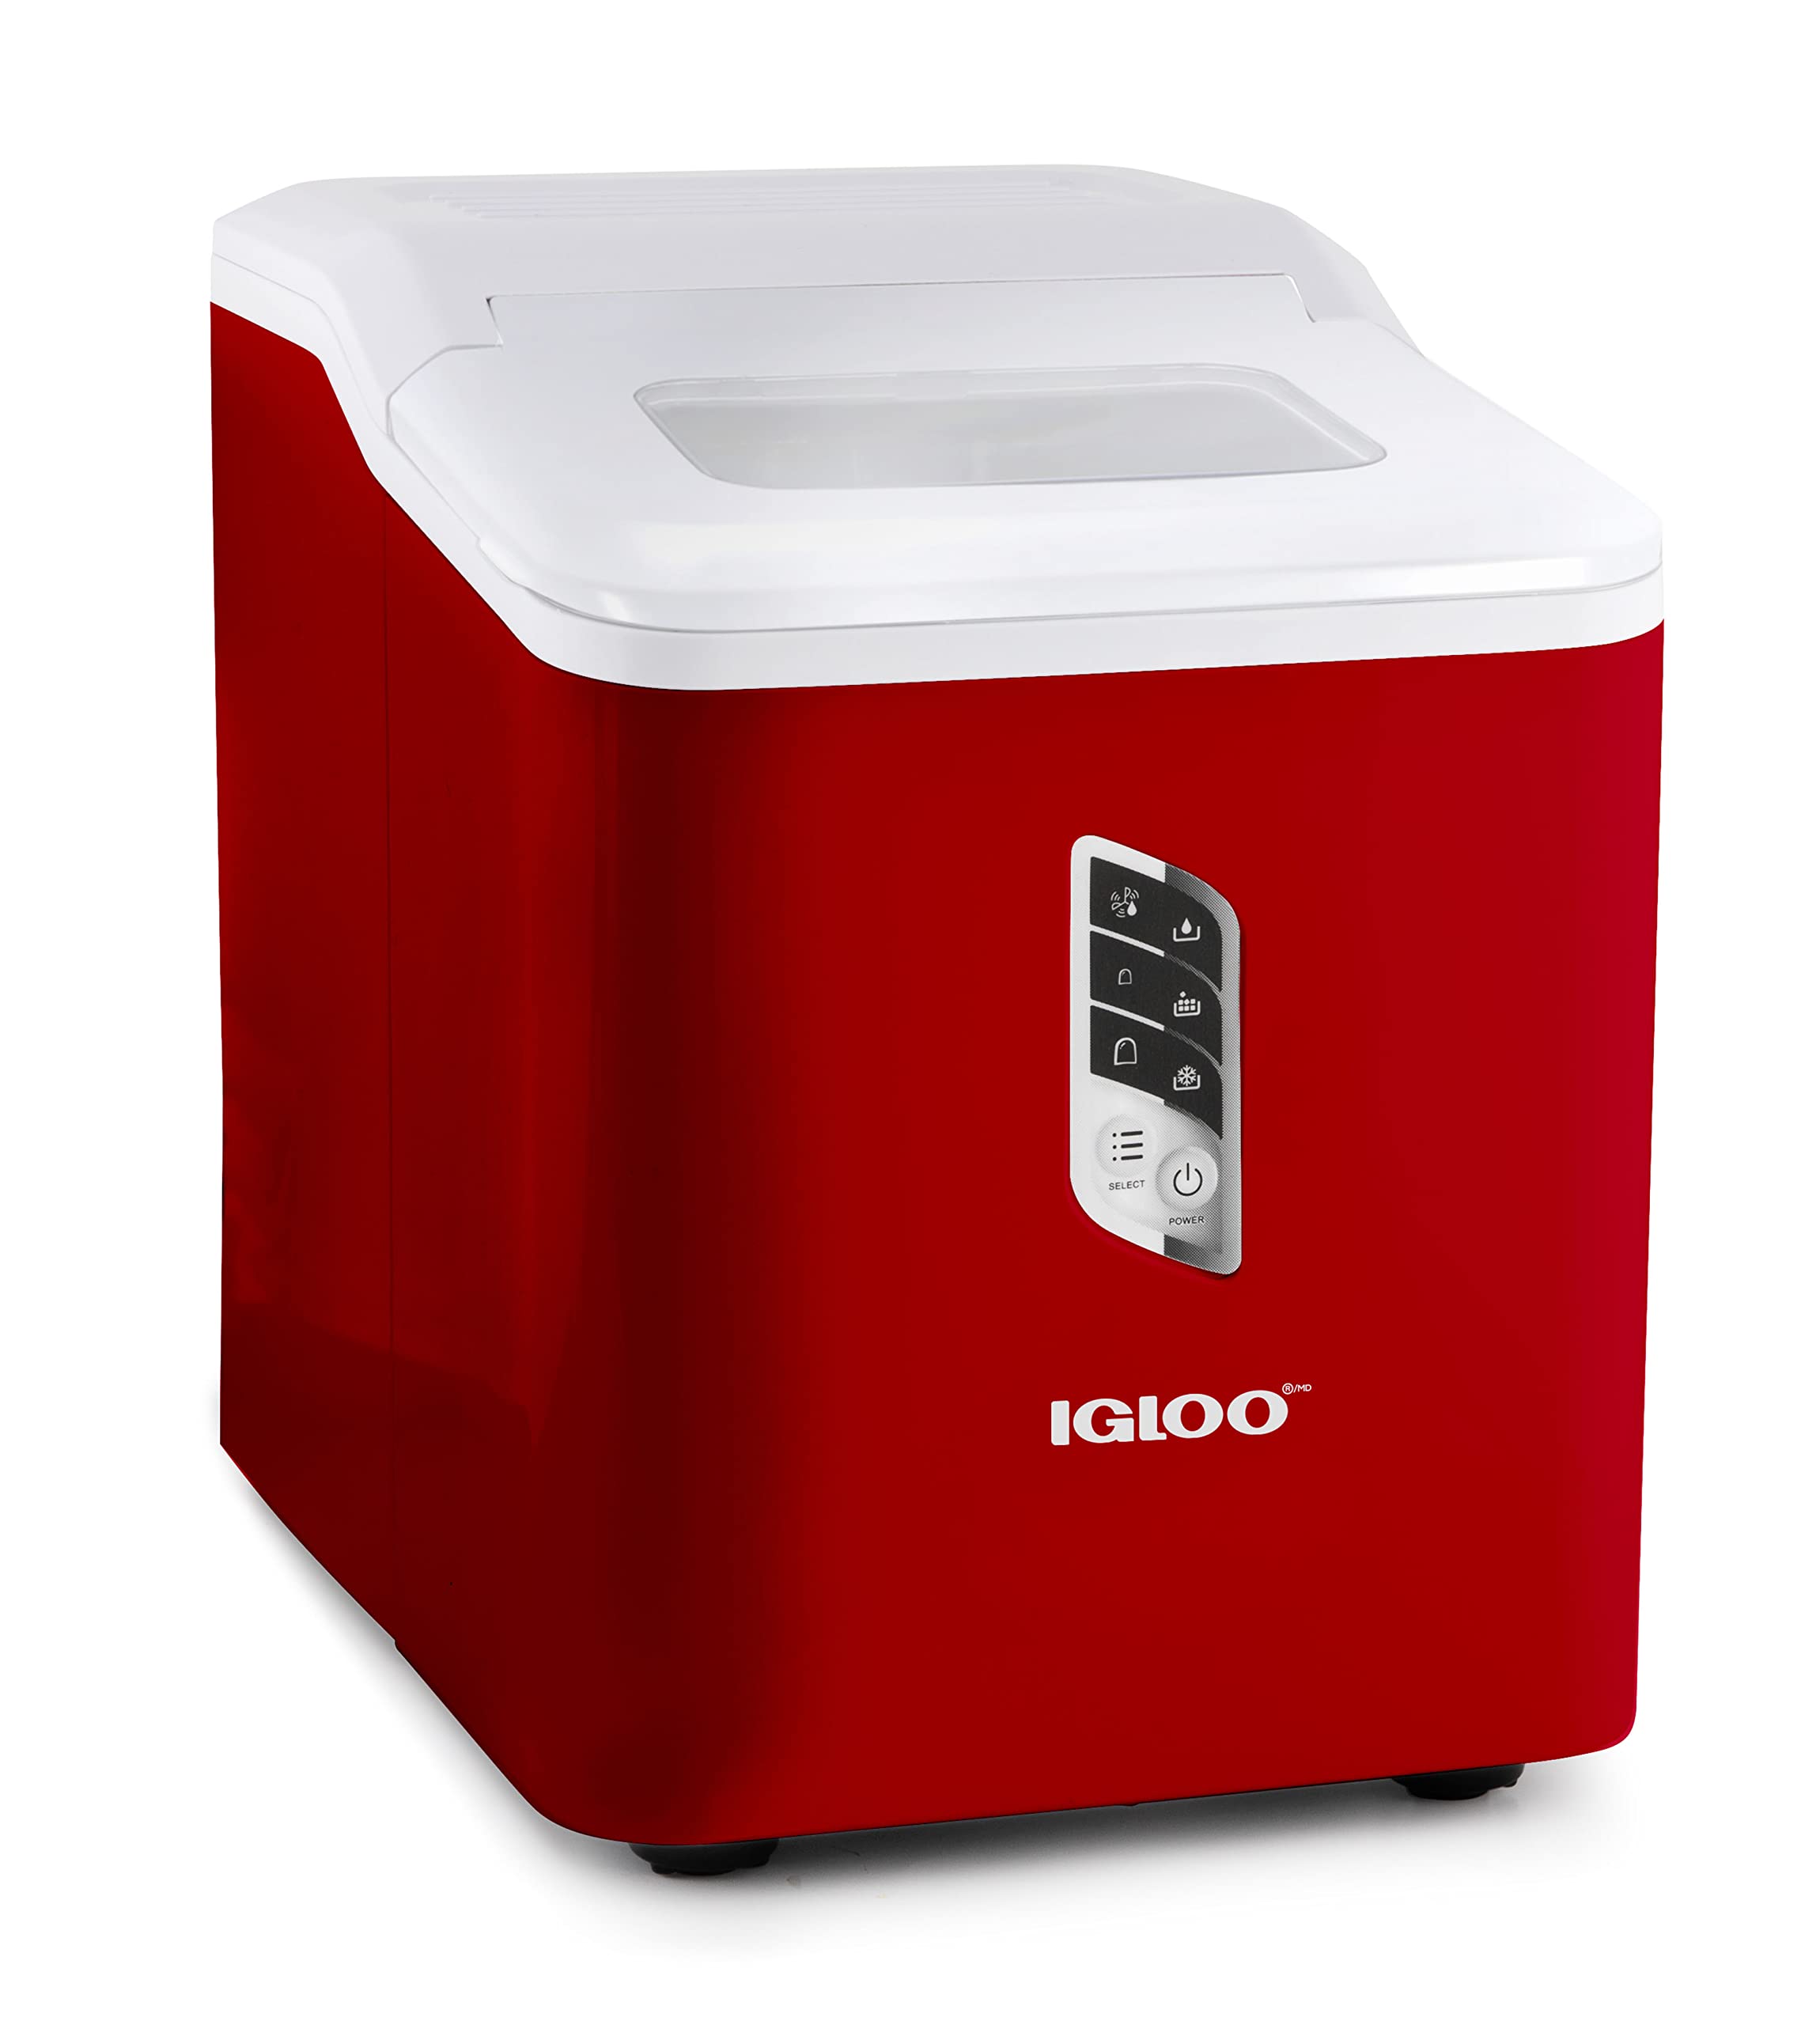 Igloo Automatic Ice Maker, Self- Cleaning, Countertop Size, 26 Pounds in 24 Hours, 9 Large or Small Ice Cubes in 7 Minutes, LED Control Panel, Scoop Included, Perfect for Water Bottles, Mixed Drinks